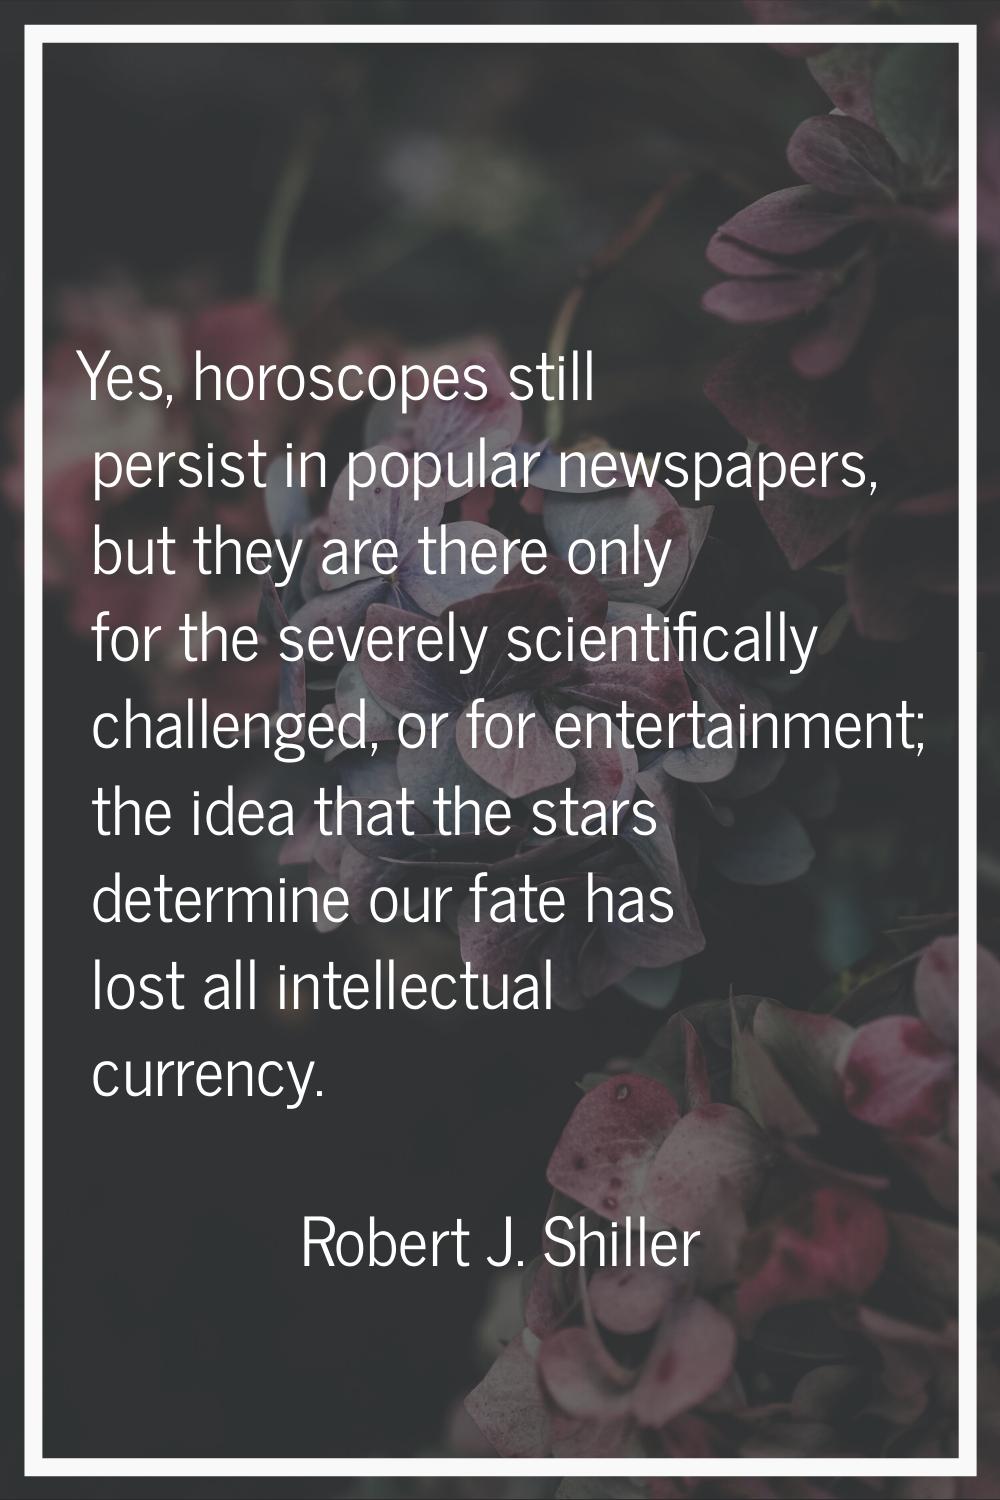 Yes, horoscopes still persist in popular newspapers, but they are there only for the severely scien